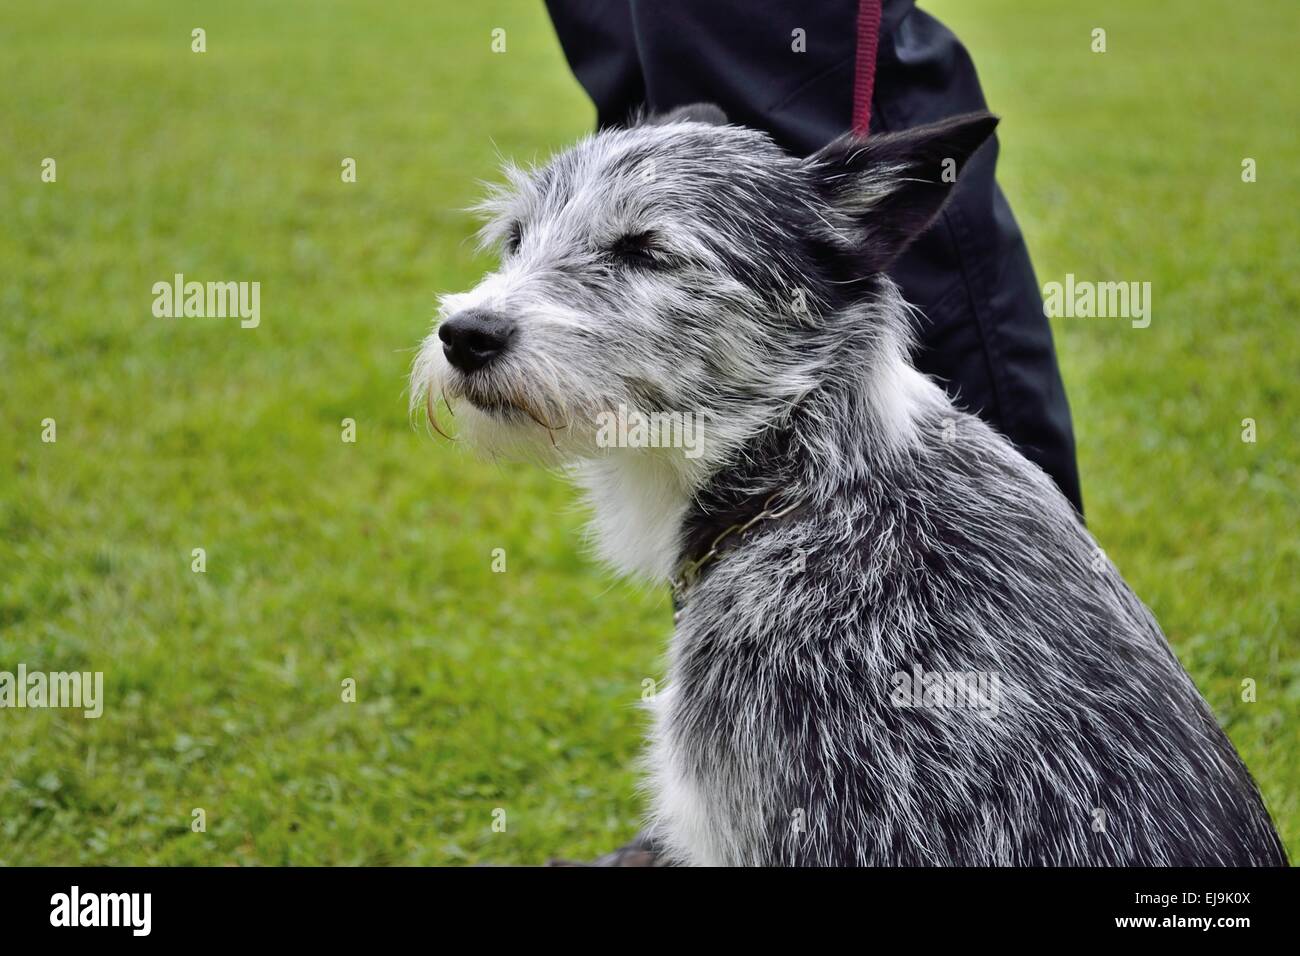 shaggy black and white dog with leash Stock Photo